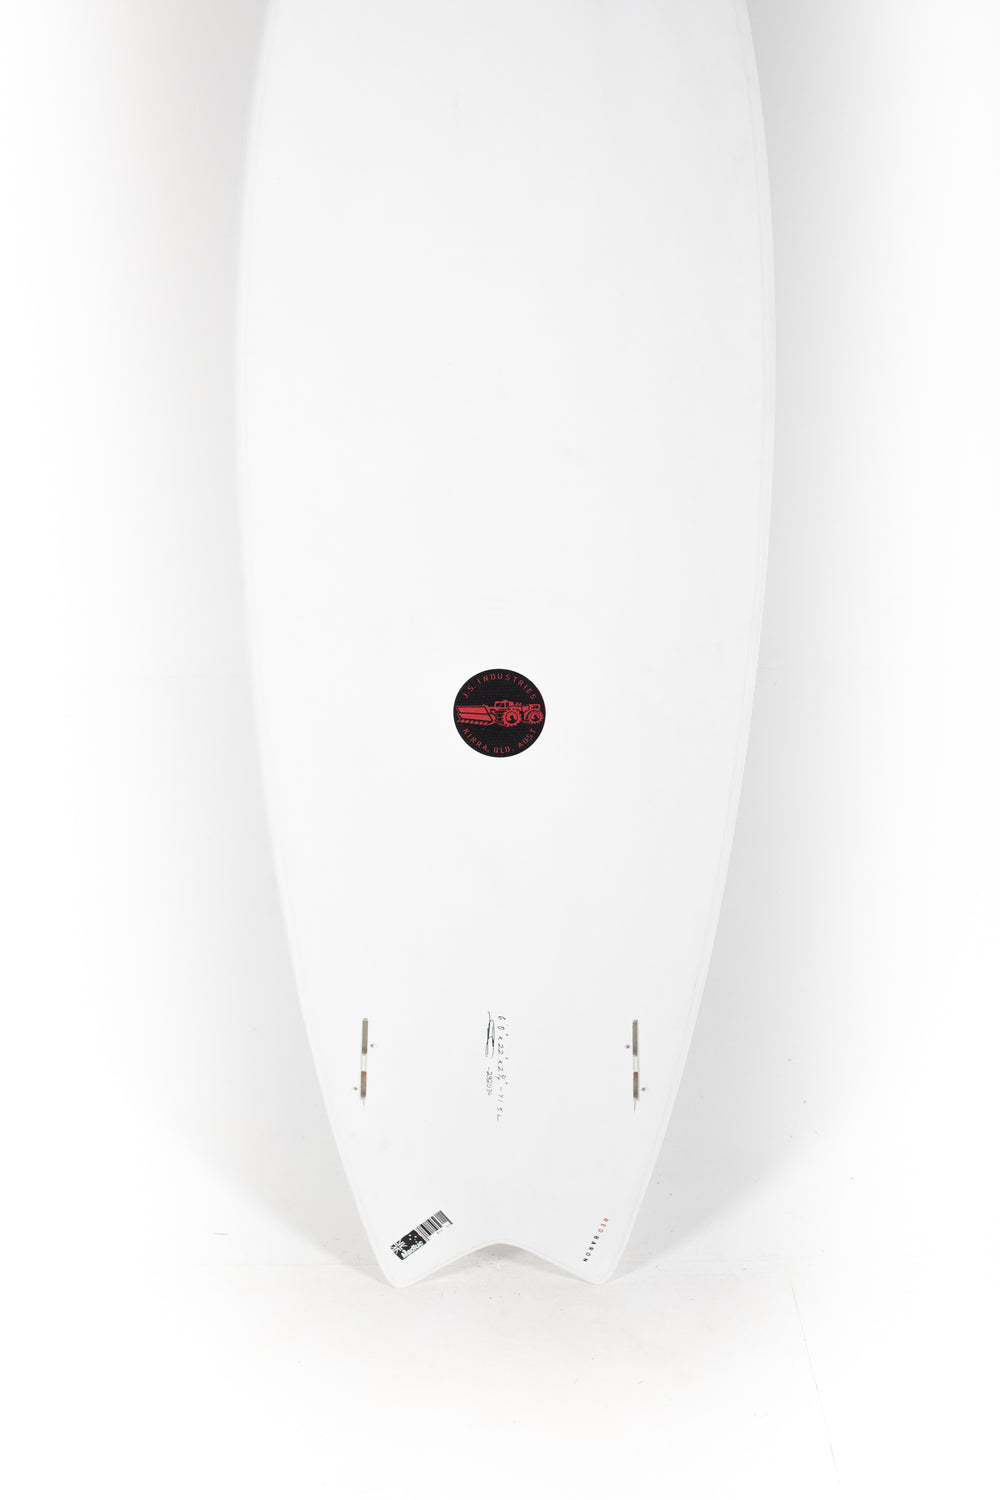 JS Surfboards - RED BARON - 6'0